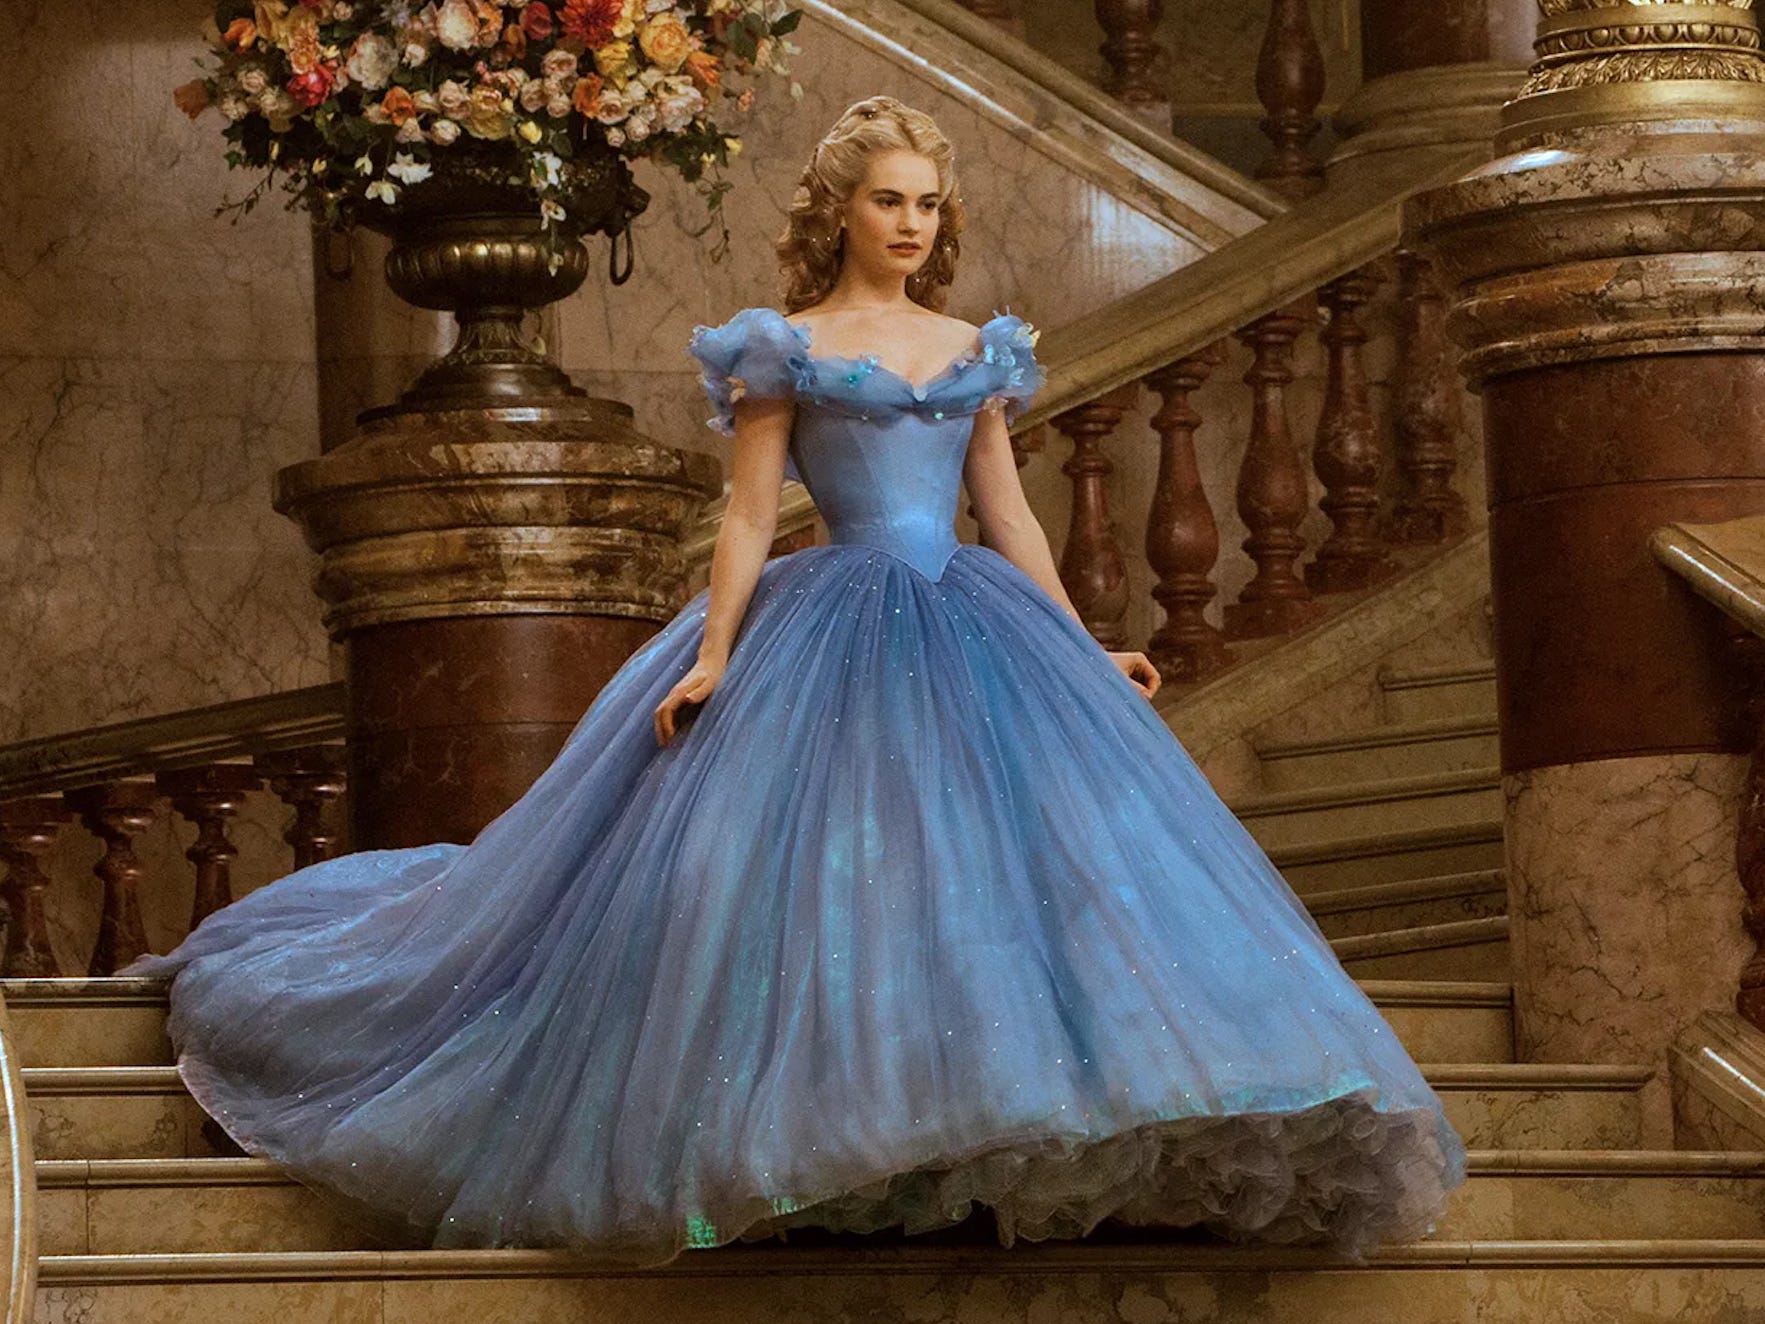 <p>Maybe this is because we just don't think the original "<a href="https://www.businessinsider.com/actors-who-played-cinderella-movies-tv-2021-10">Cinderella</a>" from 1950 is that good. Yes, "Bibbidi-Bobbidi Boo" is a banger, and the animation of Cinderella's dress turning from a ripped-up rag to a shimmering princess-worthy ball gown is beautiful, but that's really it.</p><p>The prince is barely a character, the other songs aren't that memorable, and Cinderella herself has little personality besides being sweet.</p><p>The 2015 "Cinderella" rectifies all that. Ella, as played by Lily James, is kind, funny, and has a very strong sense of right and wrong, while Prince Kit, played by a very blue-eyed Richard Madden, gets an arc and a loving relationship with his dad.</p><p>The famous blue ball gown is also one of the rare pieces of Disney iconography that looks just as beautiful in real life. We must also mention Cate Blanchett as a fully committed Lady Tremaine and Helena Bonham Carter as the dotty Fairy Godmother.</p><p>We'd go as far as to say that "Cinderella," at least for now, is the only true Disney remake worth your time.</p>